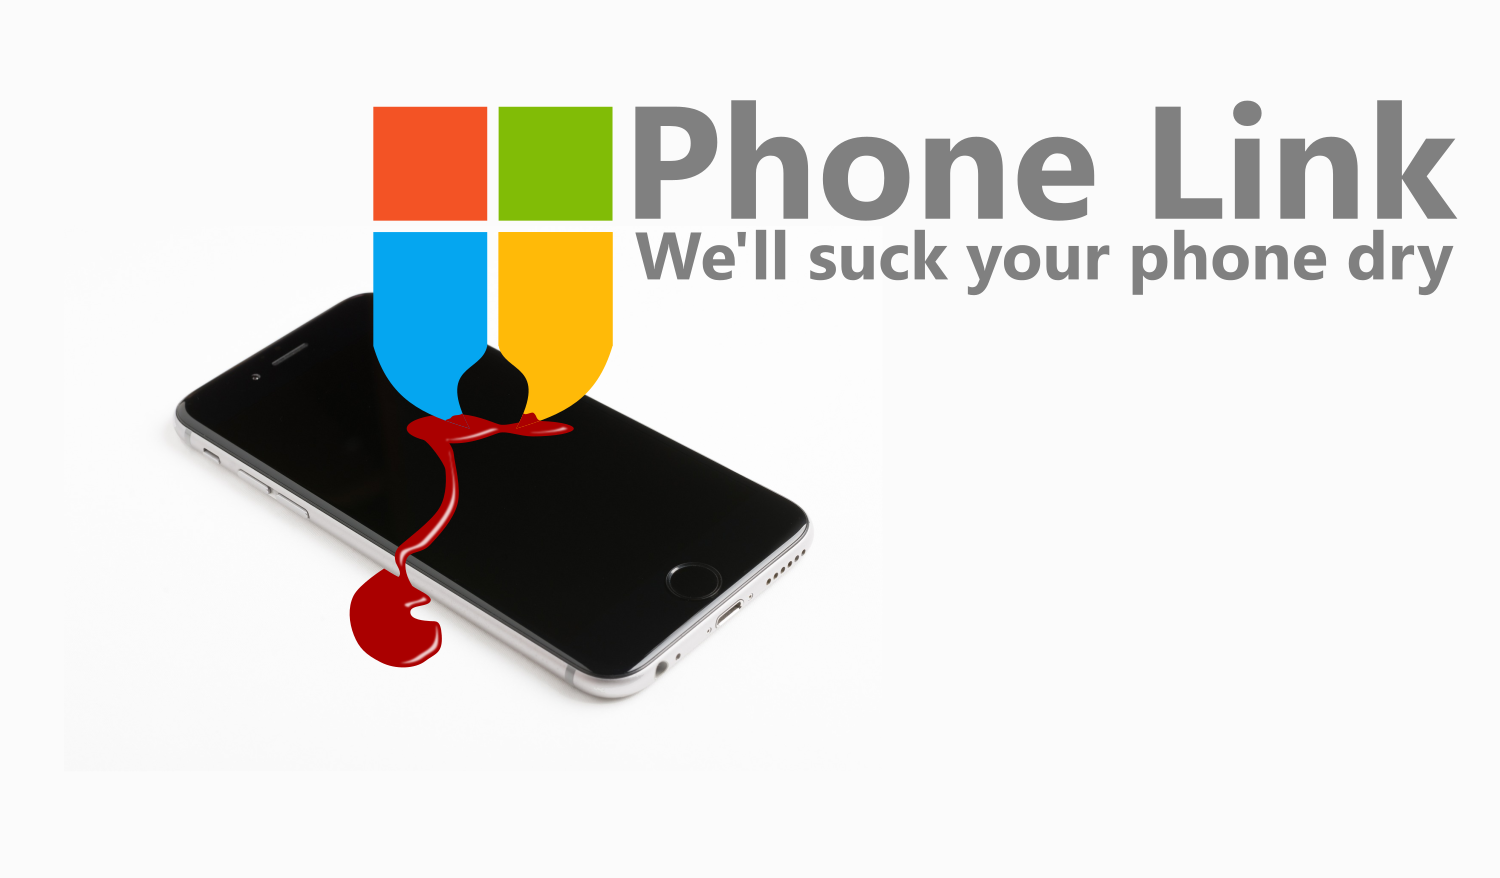 Microsoft's logo has sprout phangs! And it is sucking all the data out of your phone.

The blur reads:

Phone Link - We'll suck you phone dry 